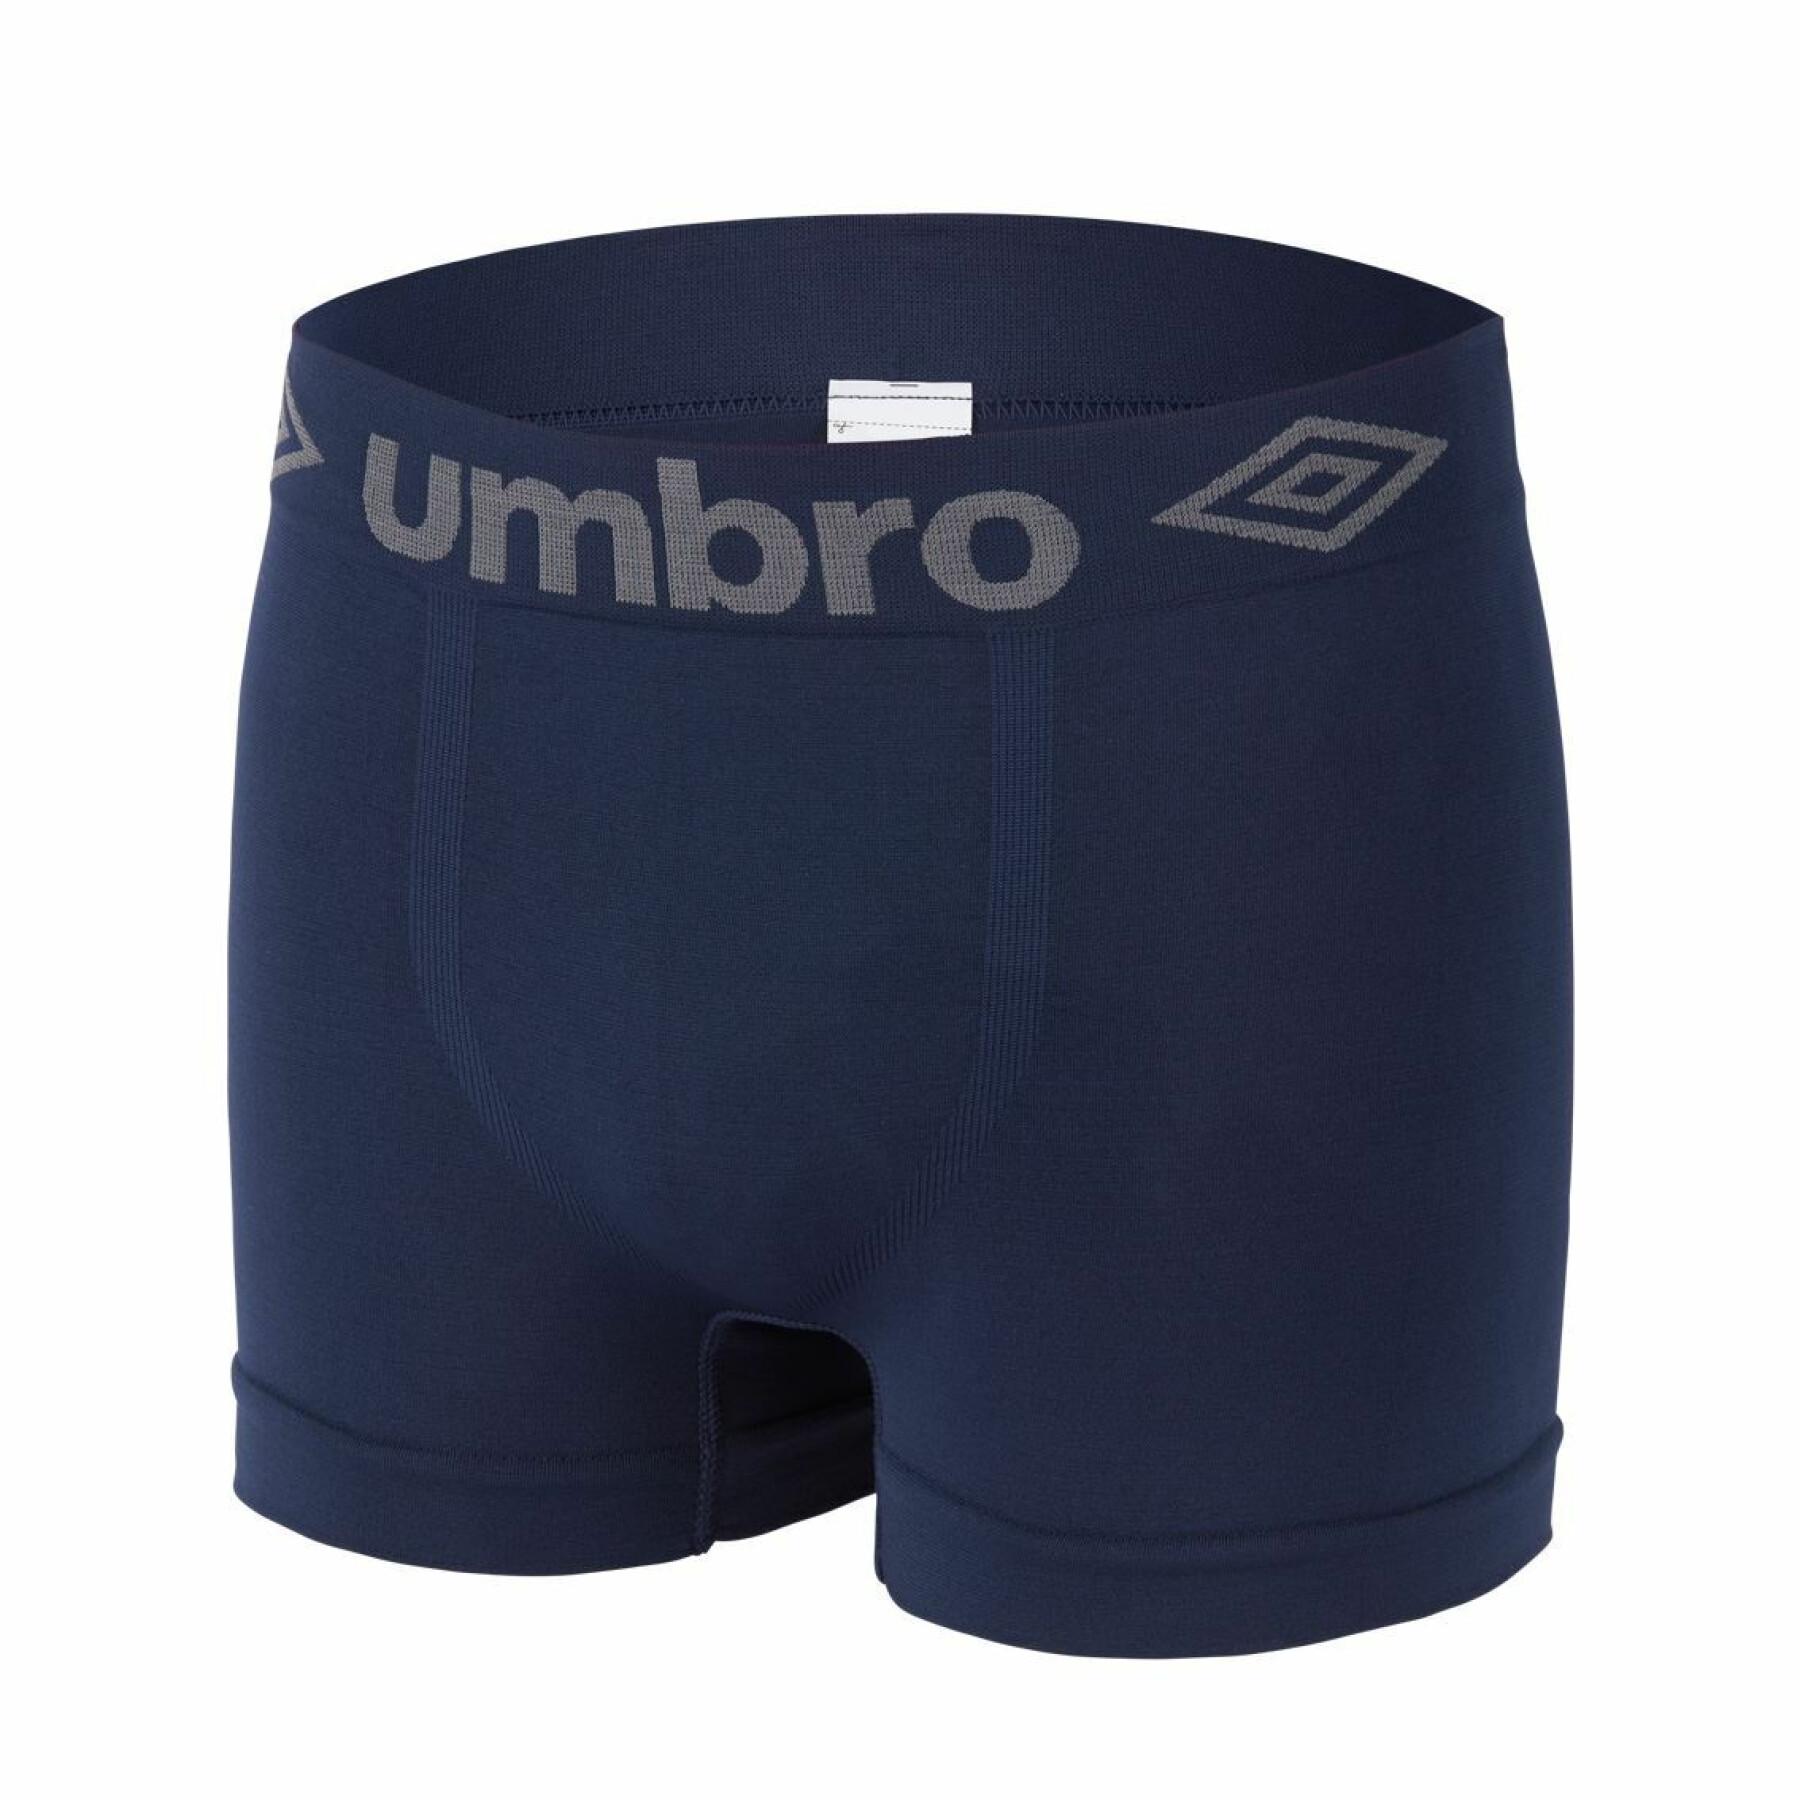 Pack of 10 seamless boxers Umbro